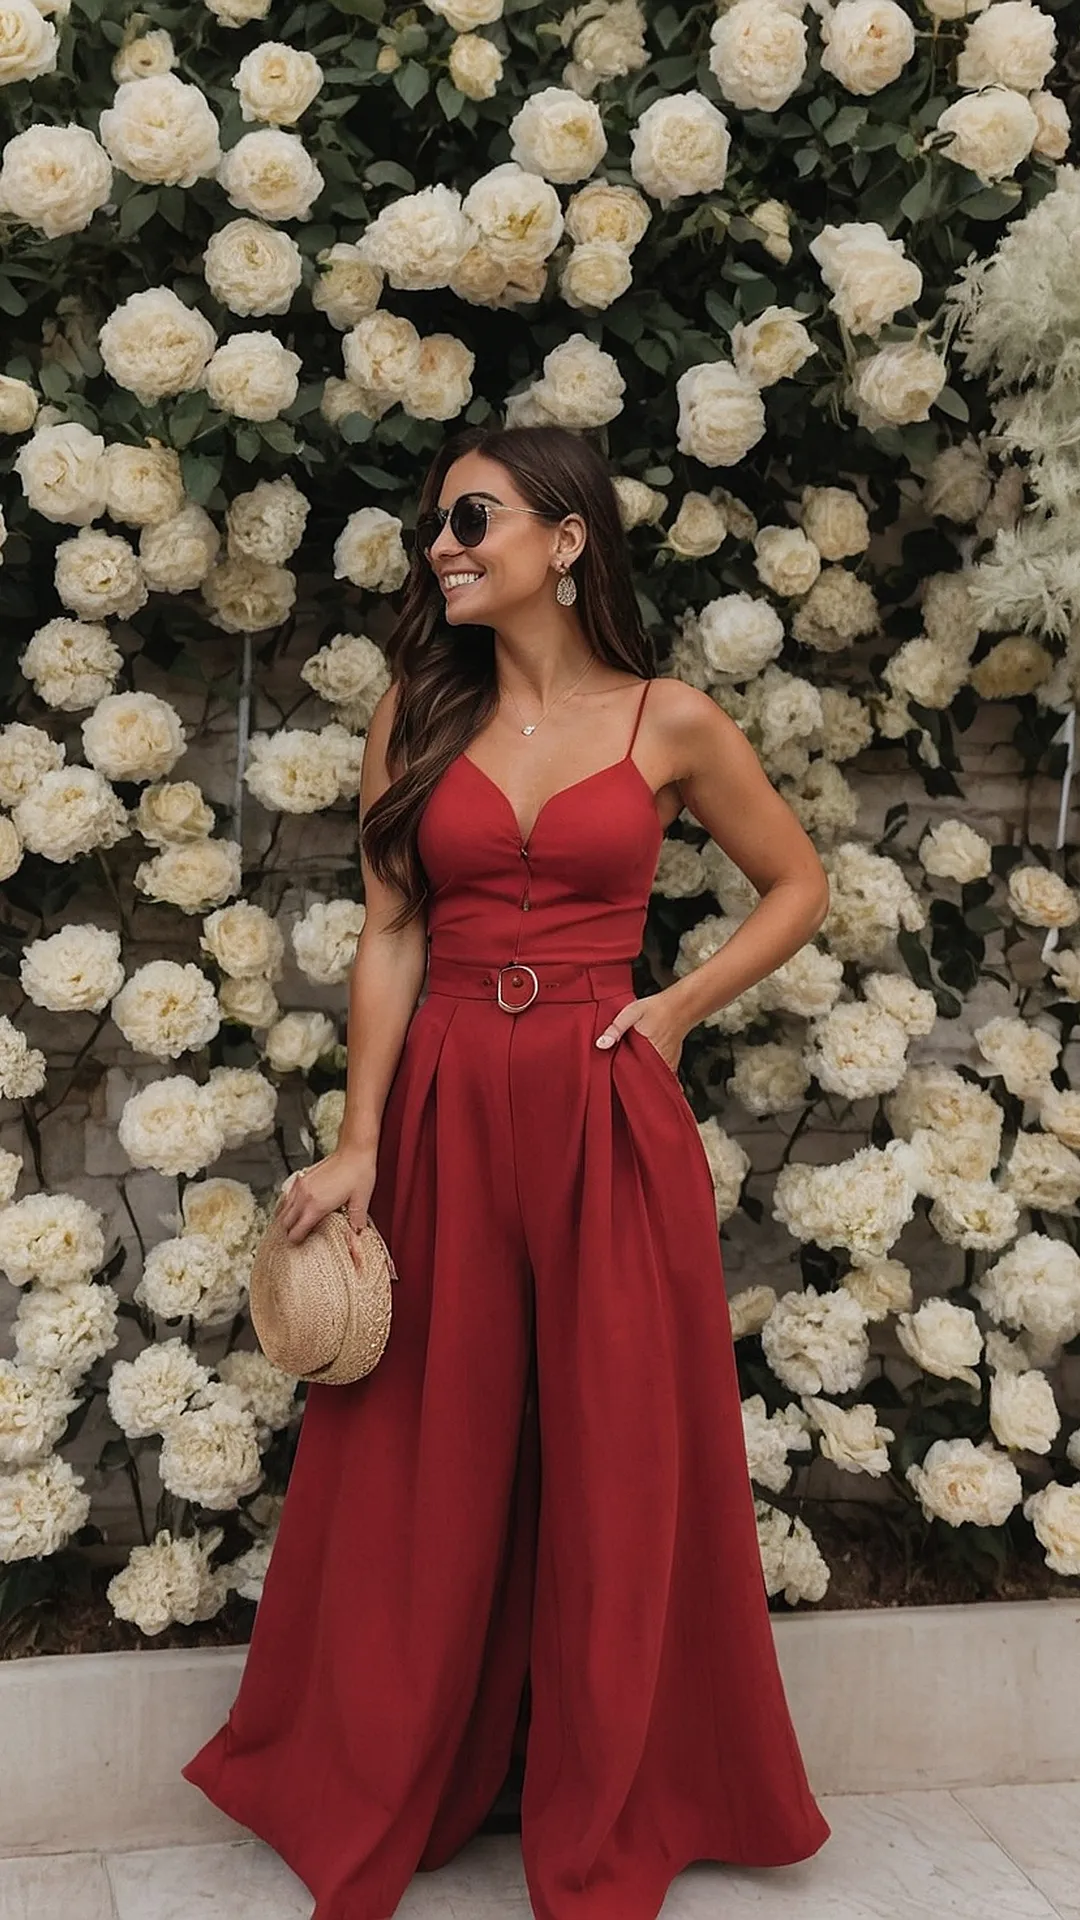 Rouge Radiance: Stylish Women's Outfits in Red